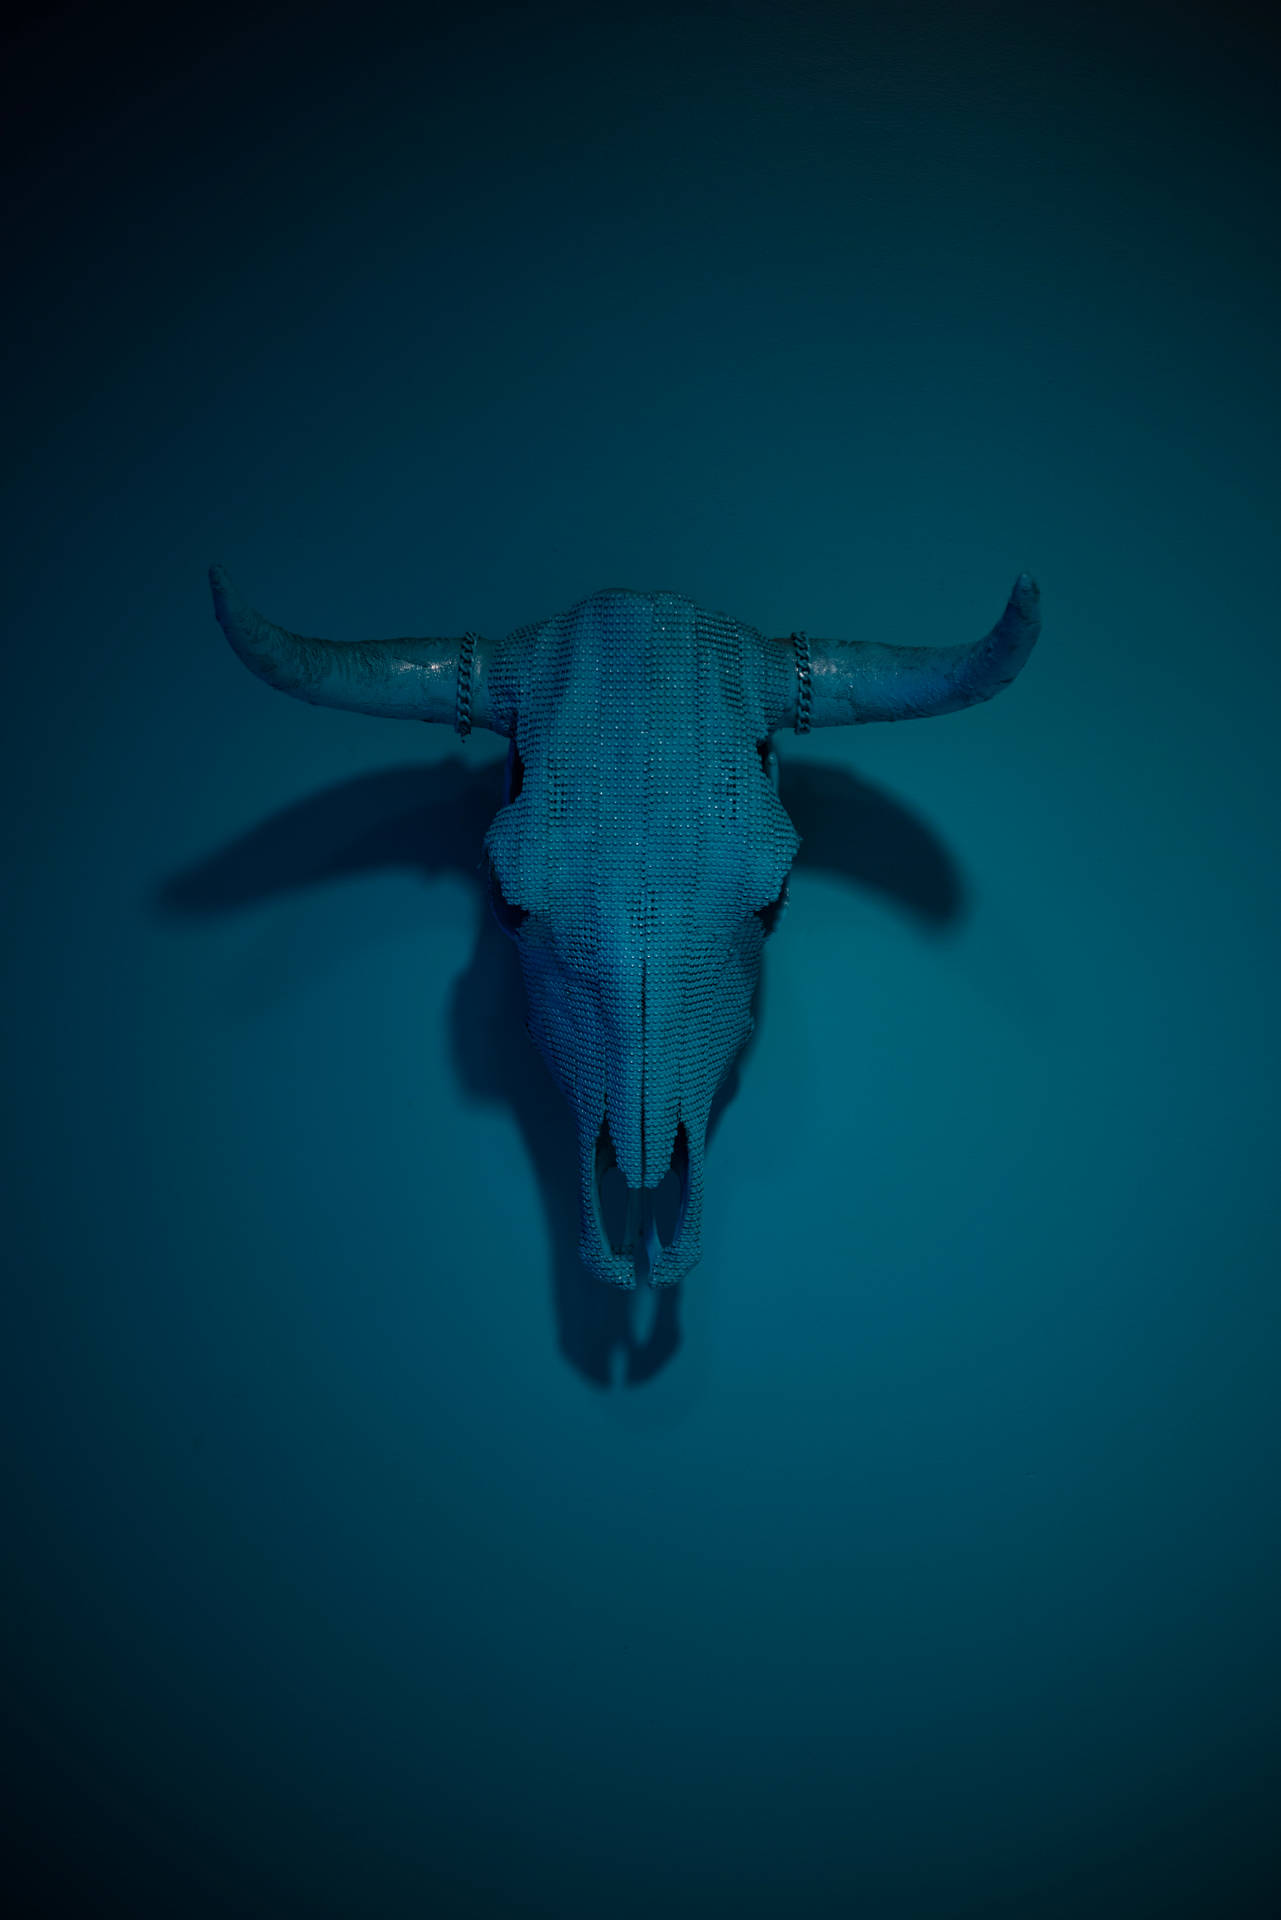 Scary Skulls Of A Bull On Wall Background